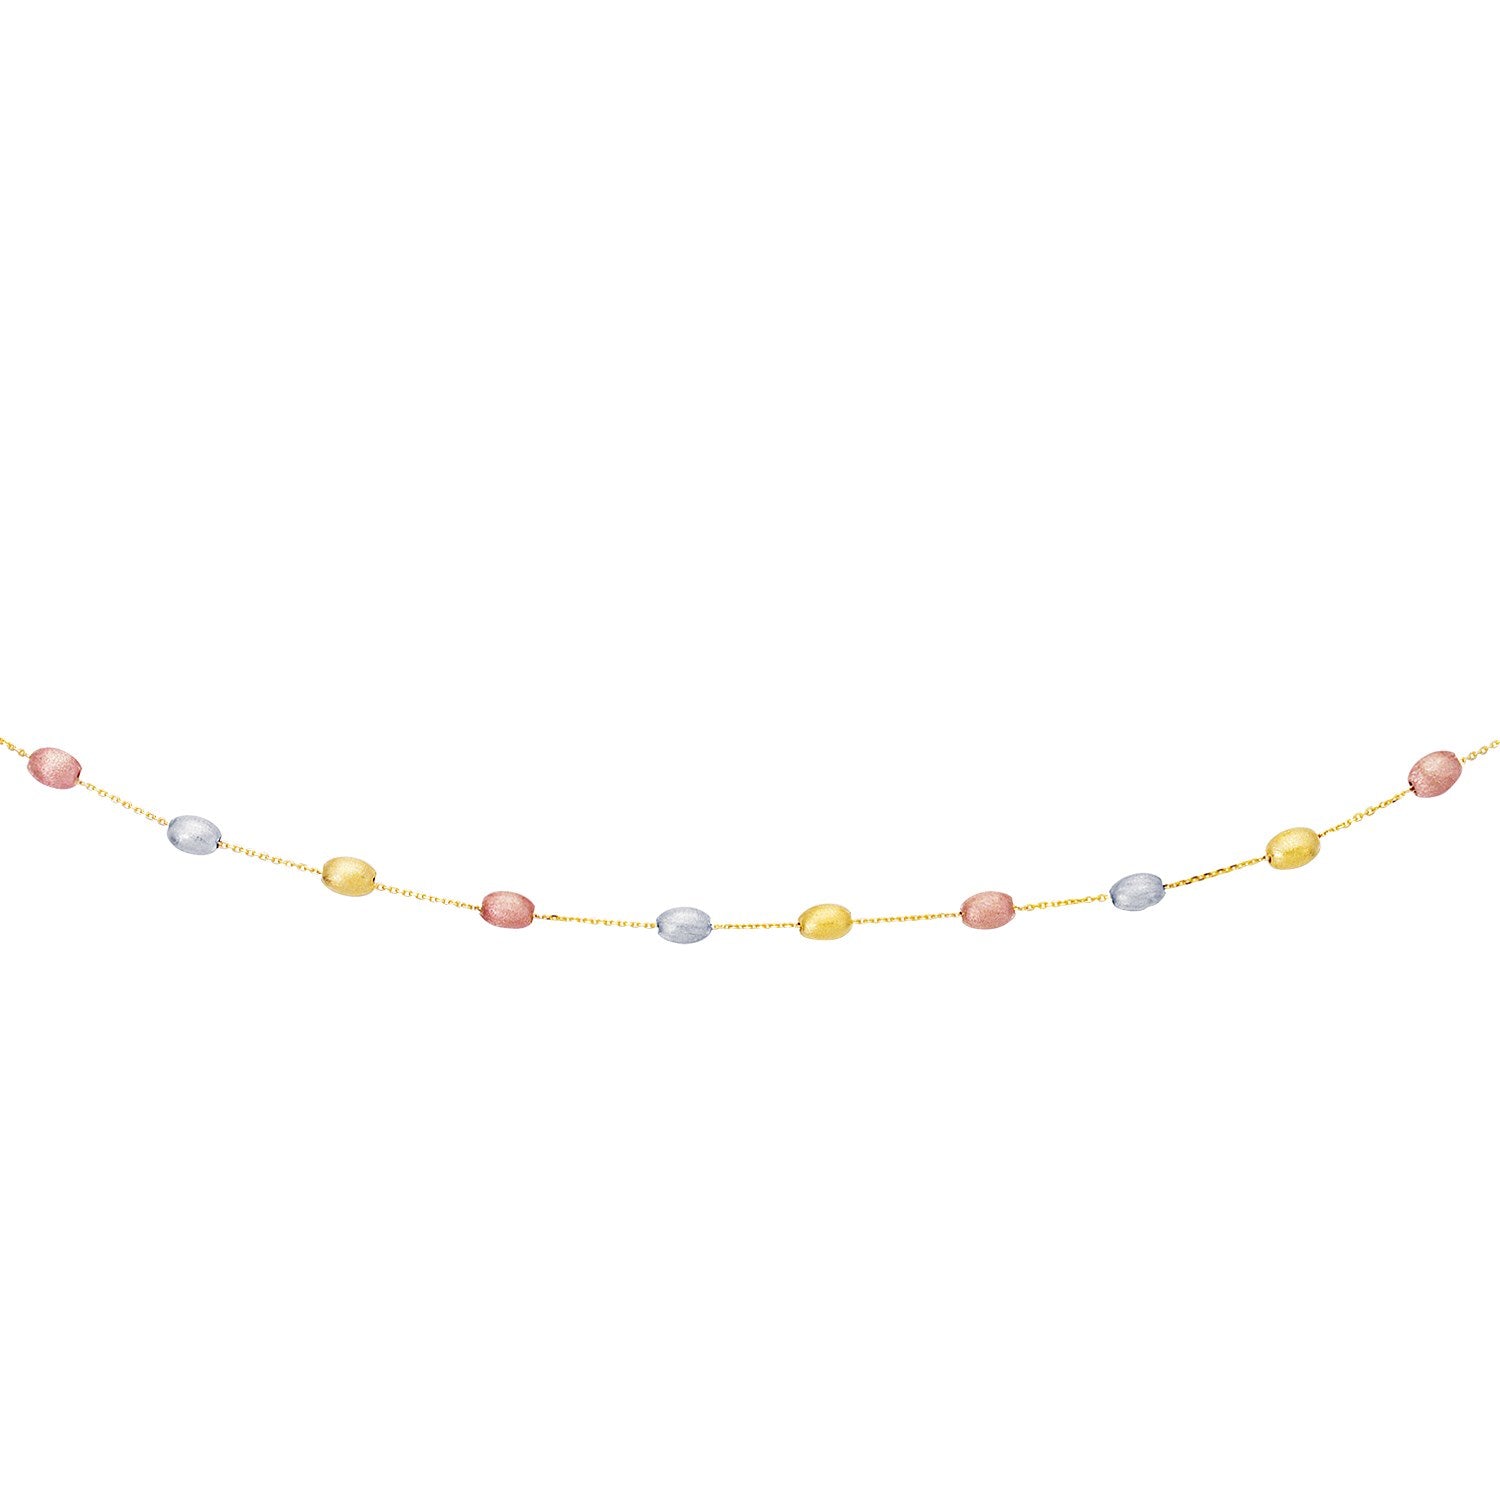 14k Tri-Color Gold Necklace with Fancy Textured Pebble Stations